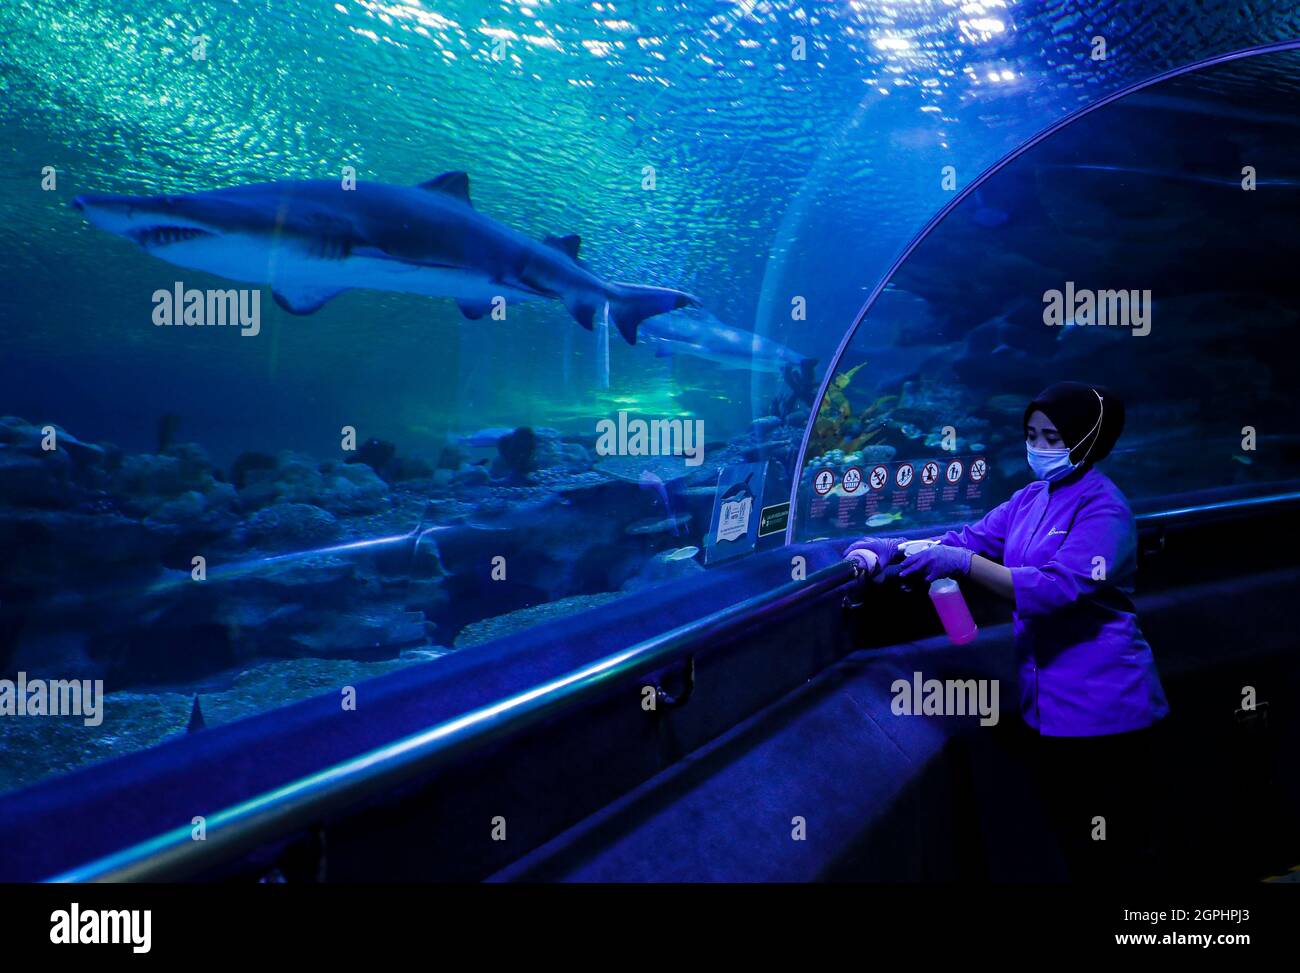 Kuala Lumpur, Malaysia. 29th Sep, 2021. A worker wearing a face mask seen cleaning at the Aquaria KLCC prior to re-opening to the public in Kuala Lumpur.Recreational parks will be allowed to open to public for activities under the Malaysia's National Recovery Plan amid the coronavirus pandemic restrictions. Credit: SOPA Images Limited/Alamy Live News Stock Photo